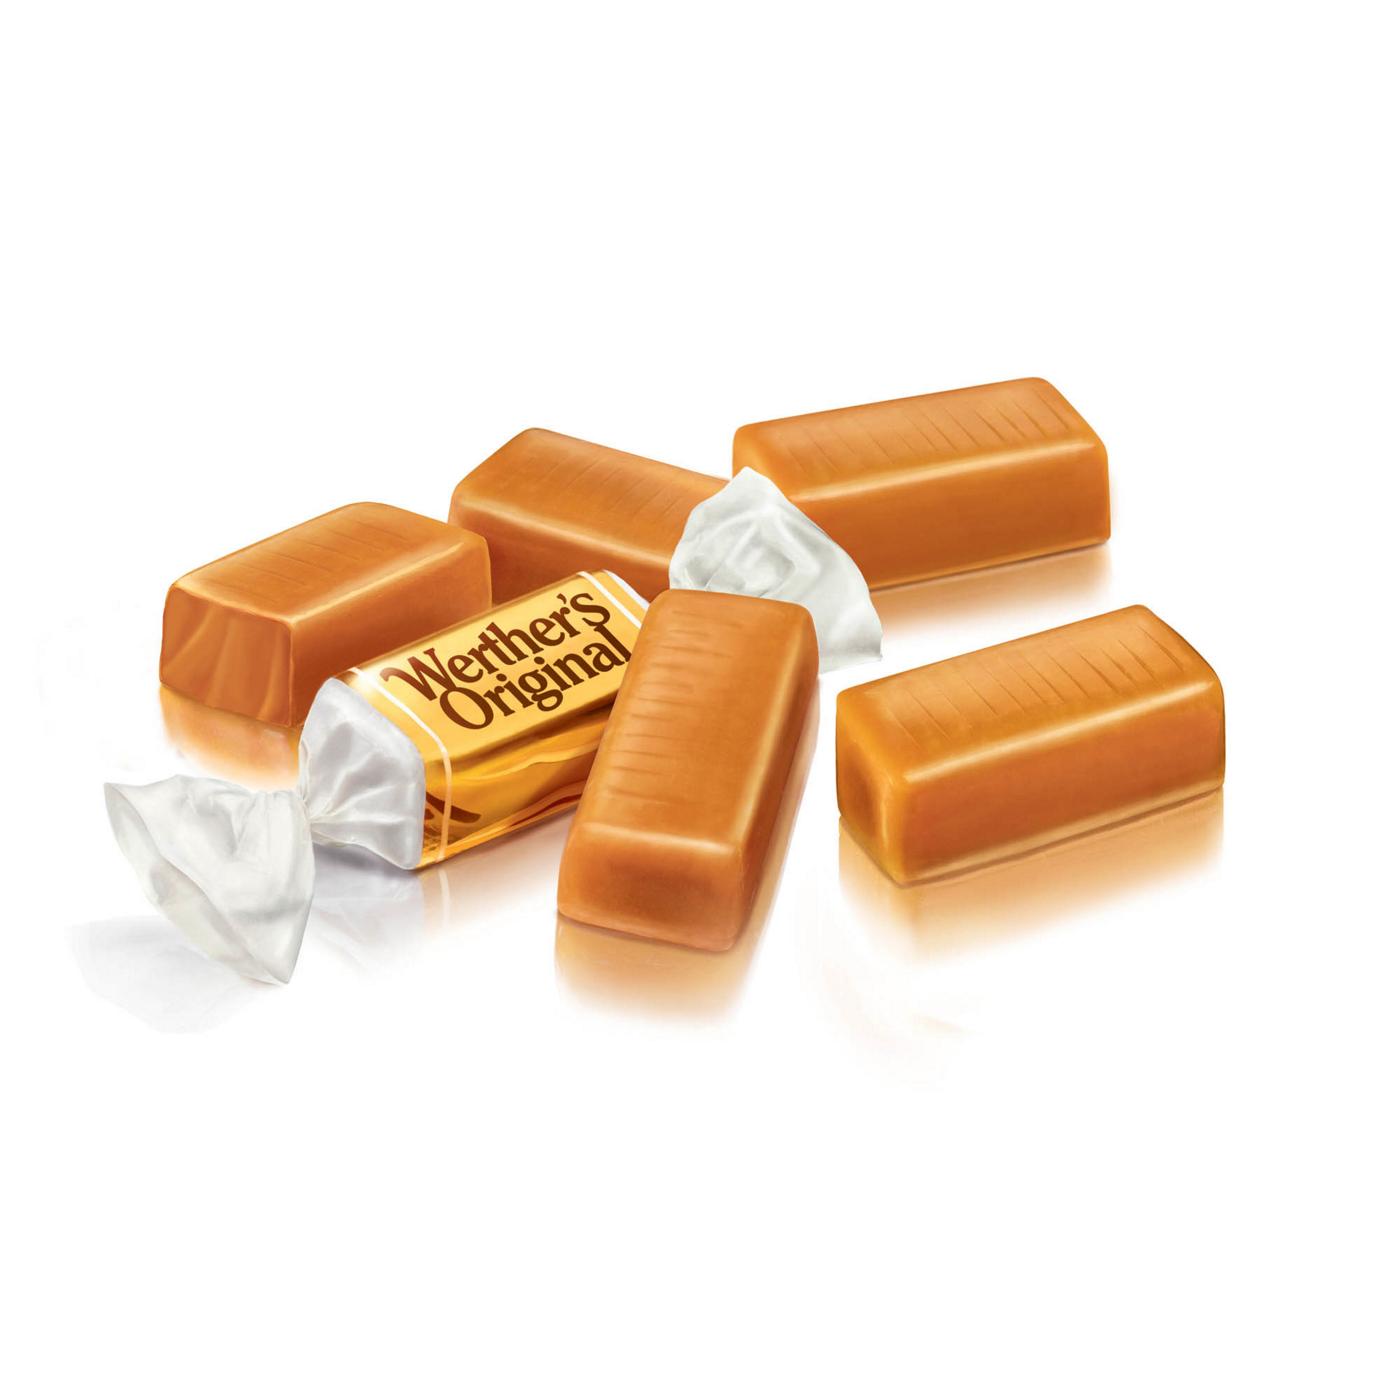 Werther's Original Chewy Caramel Candy; image 6 of 6